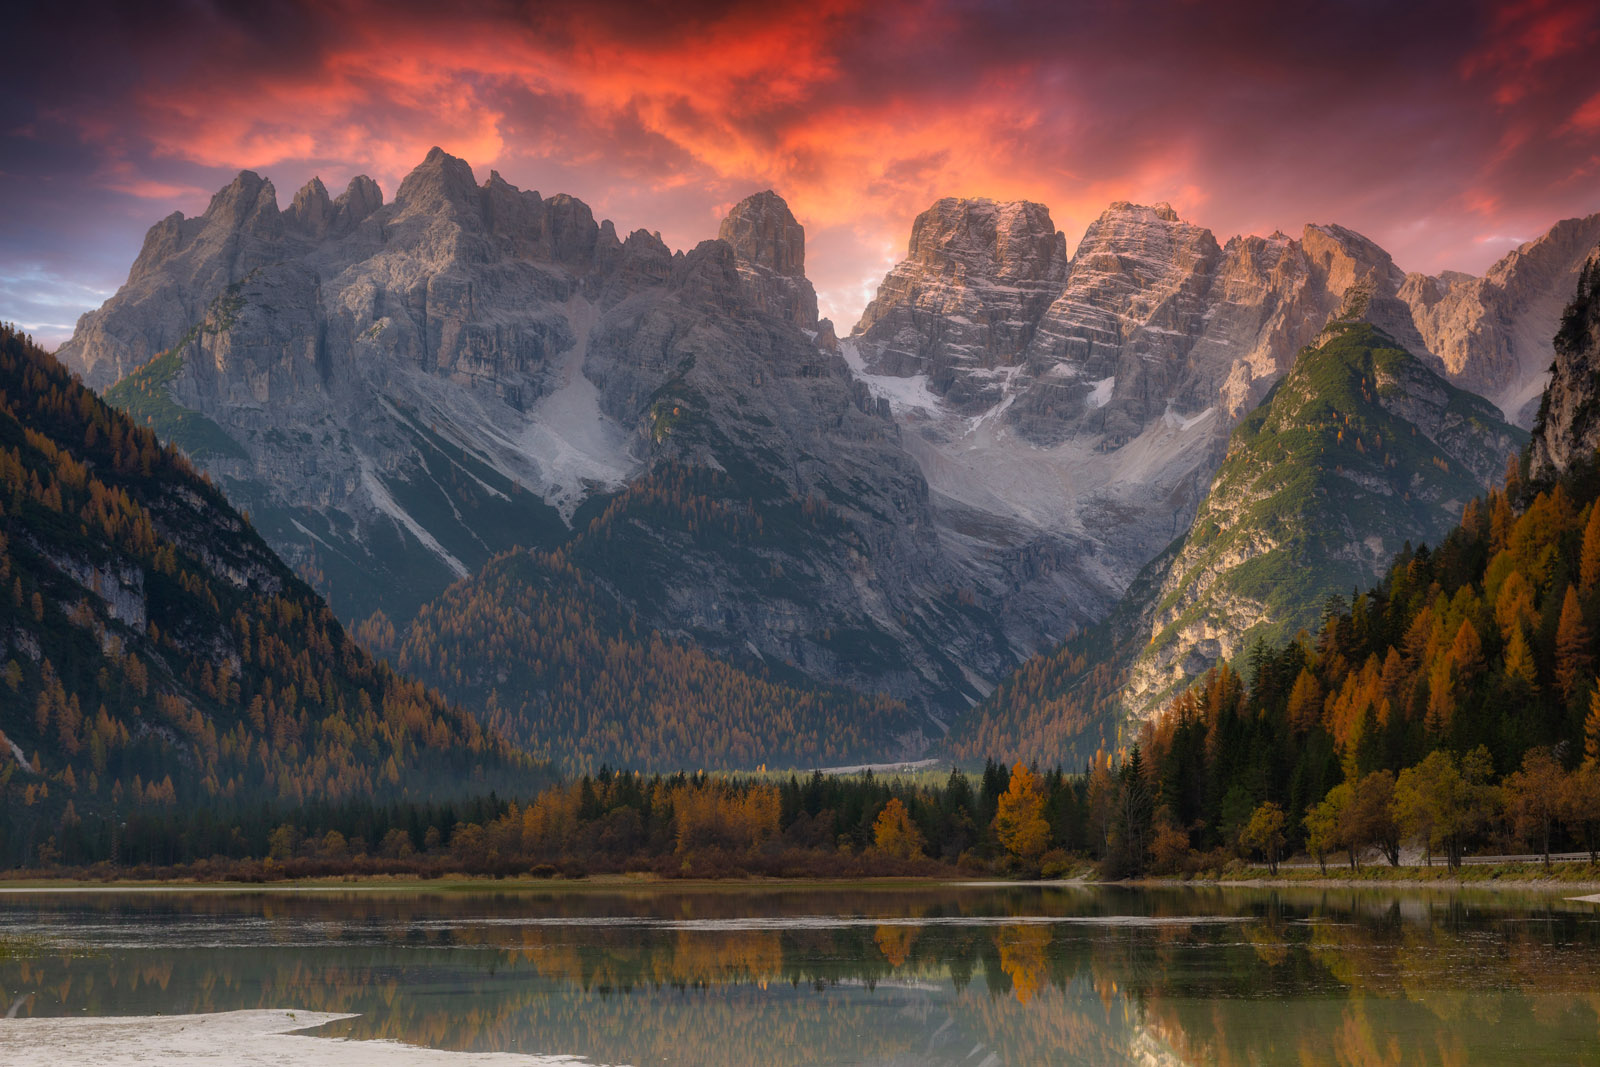 Monte Cristallo Mountains in Dolomites at sunrise, South Tyrol.